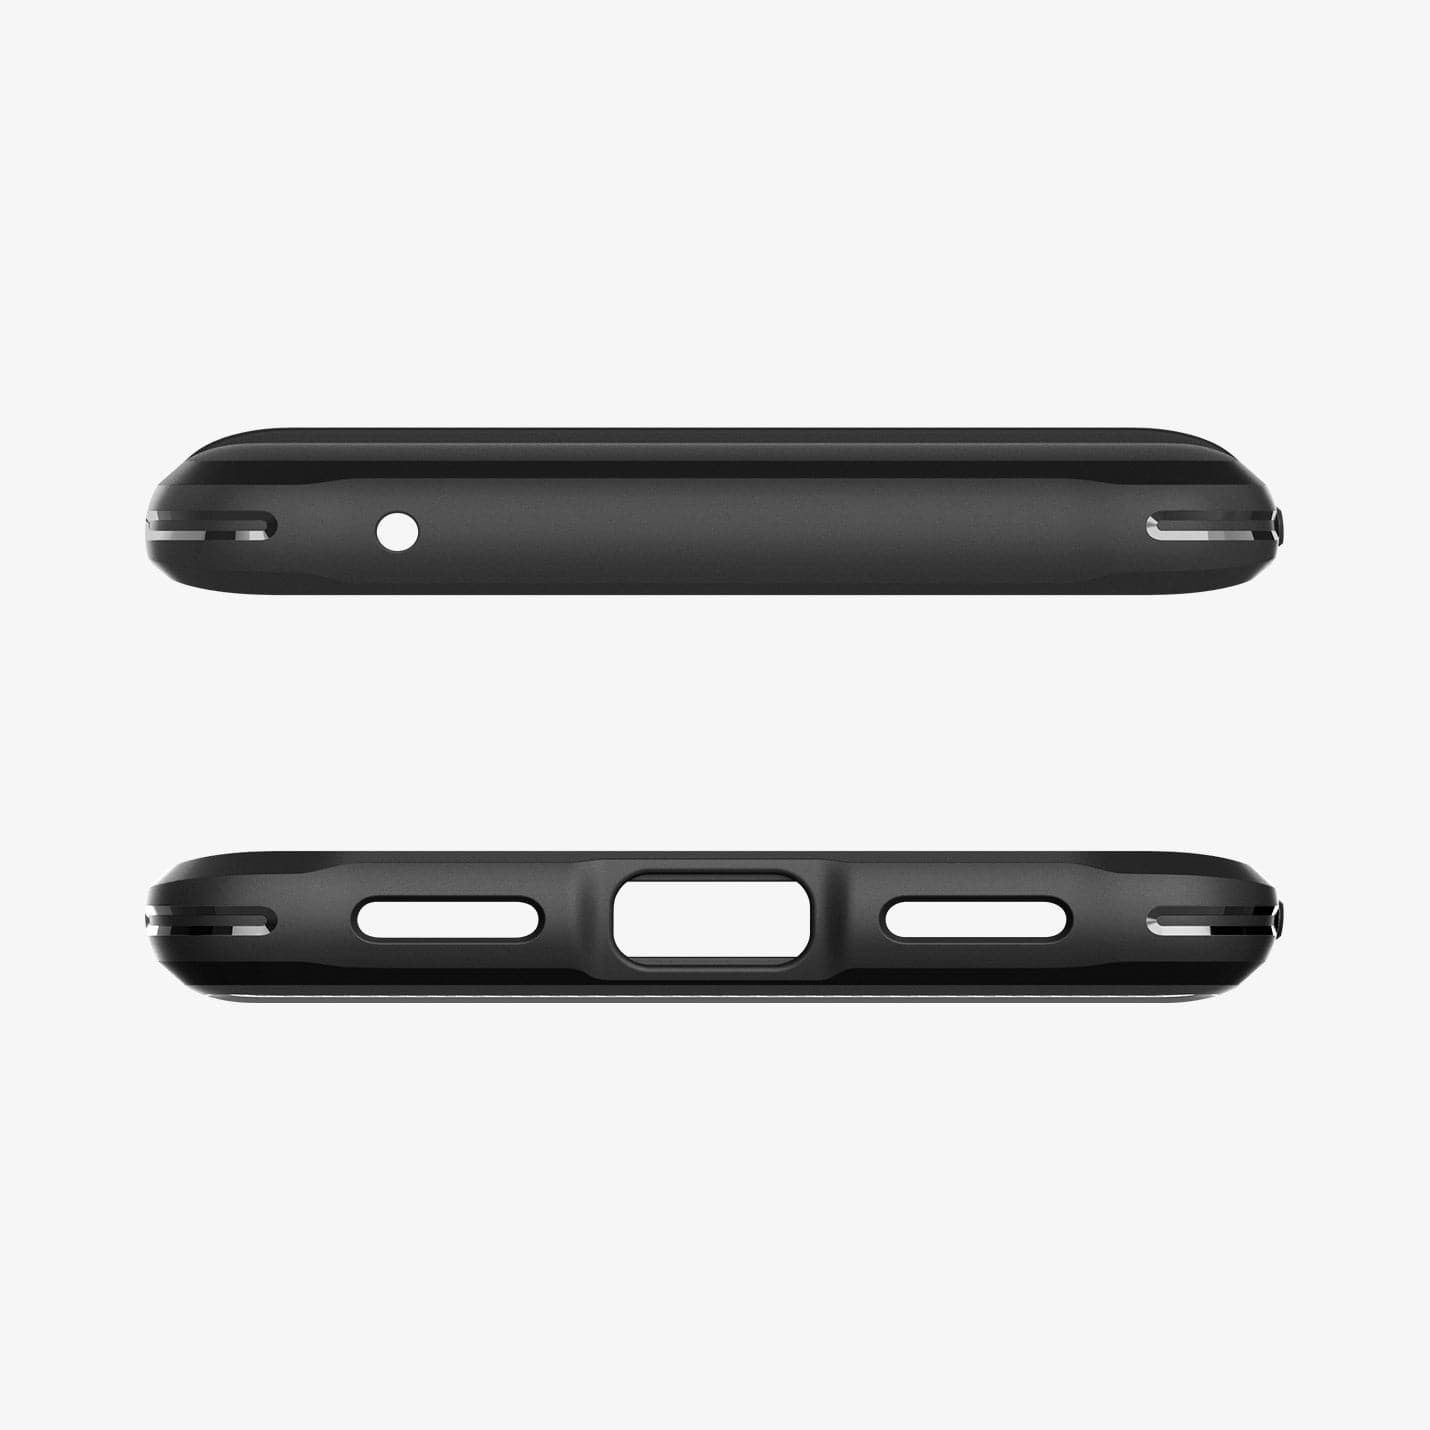 ACS04725 - Pixel 7 Pro Case Rugged Armor in matte black showing the top and bottom with precise cutouts